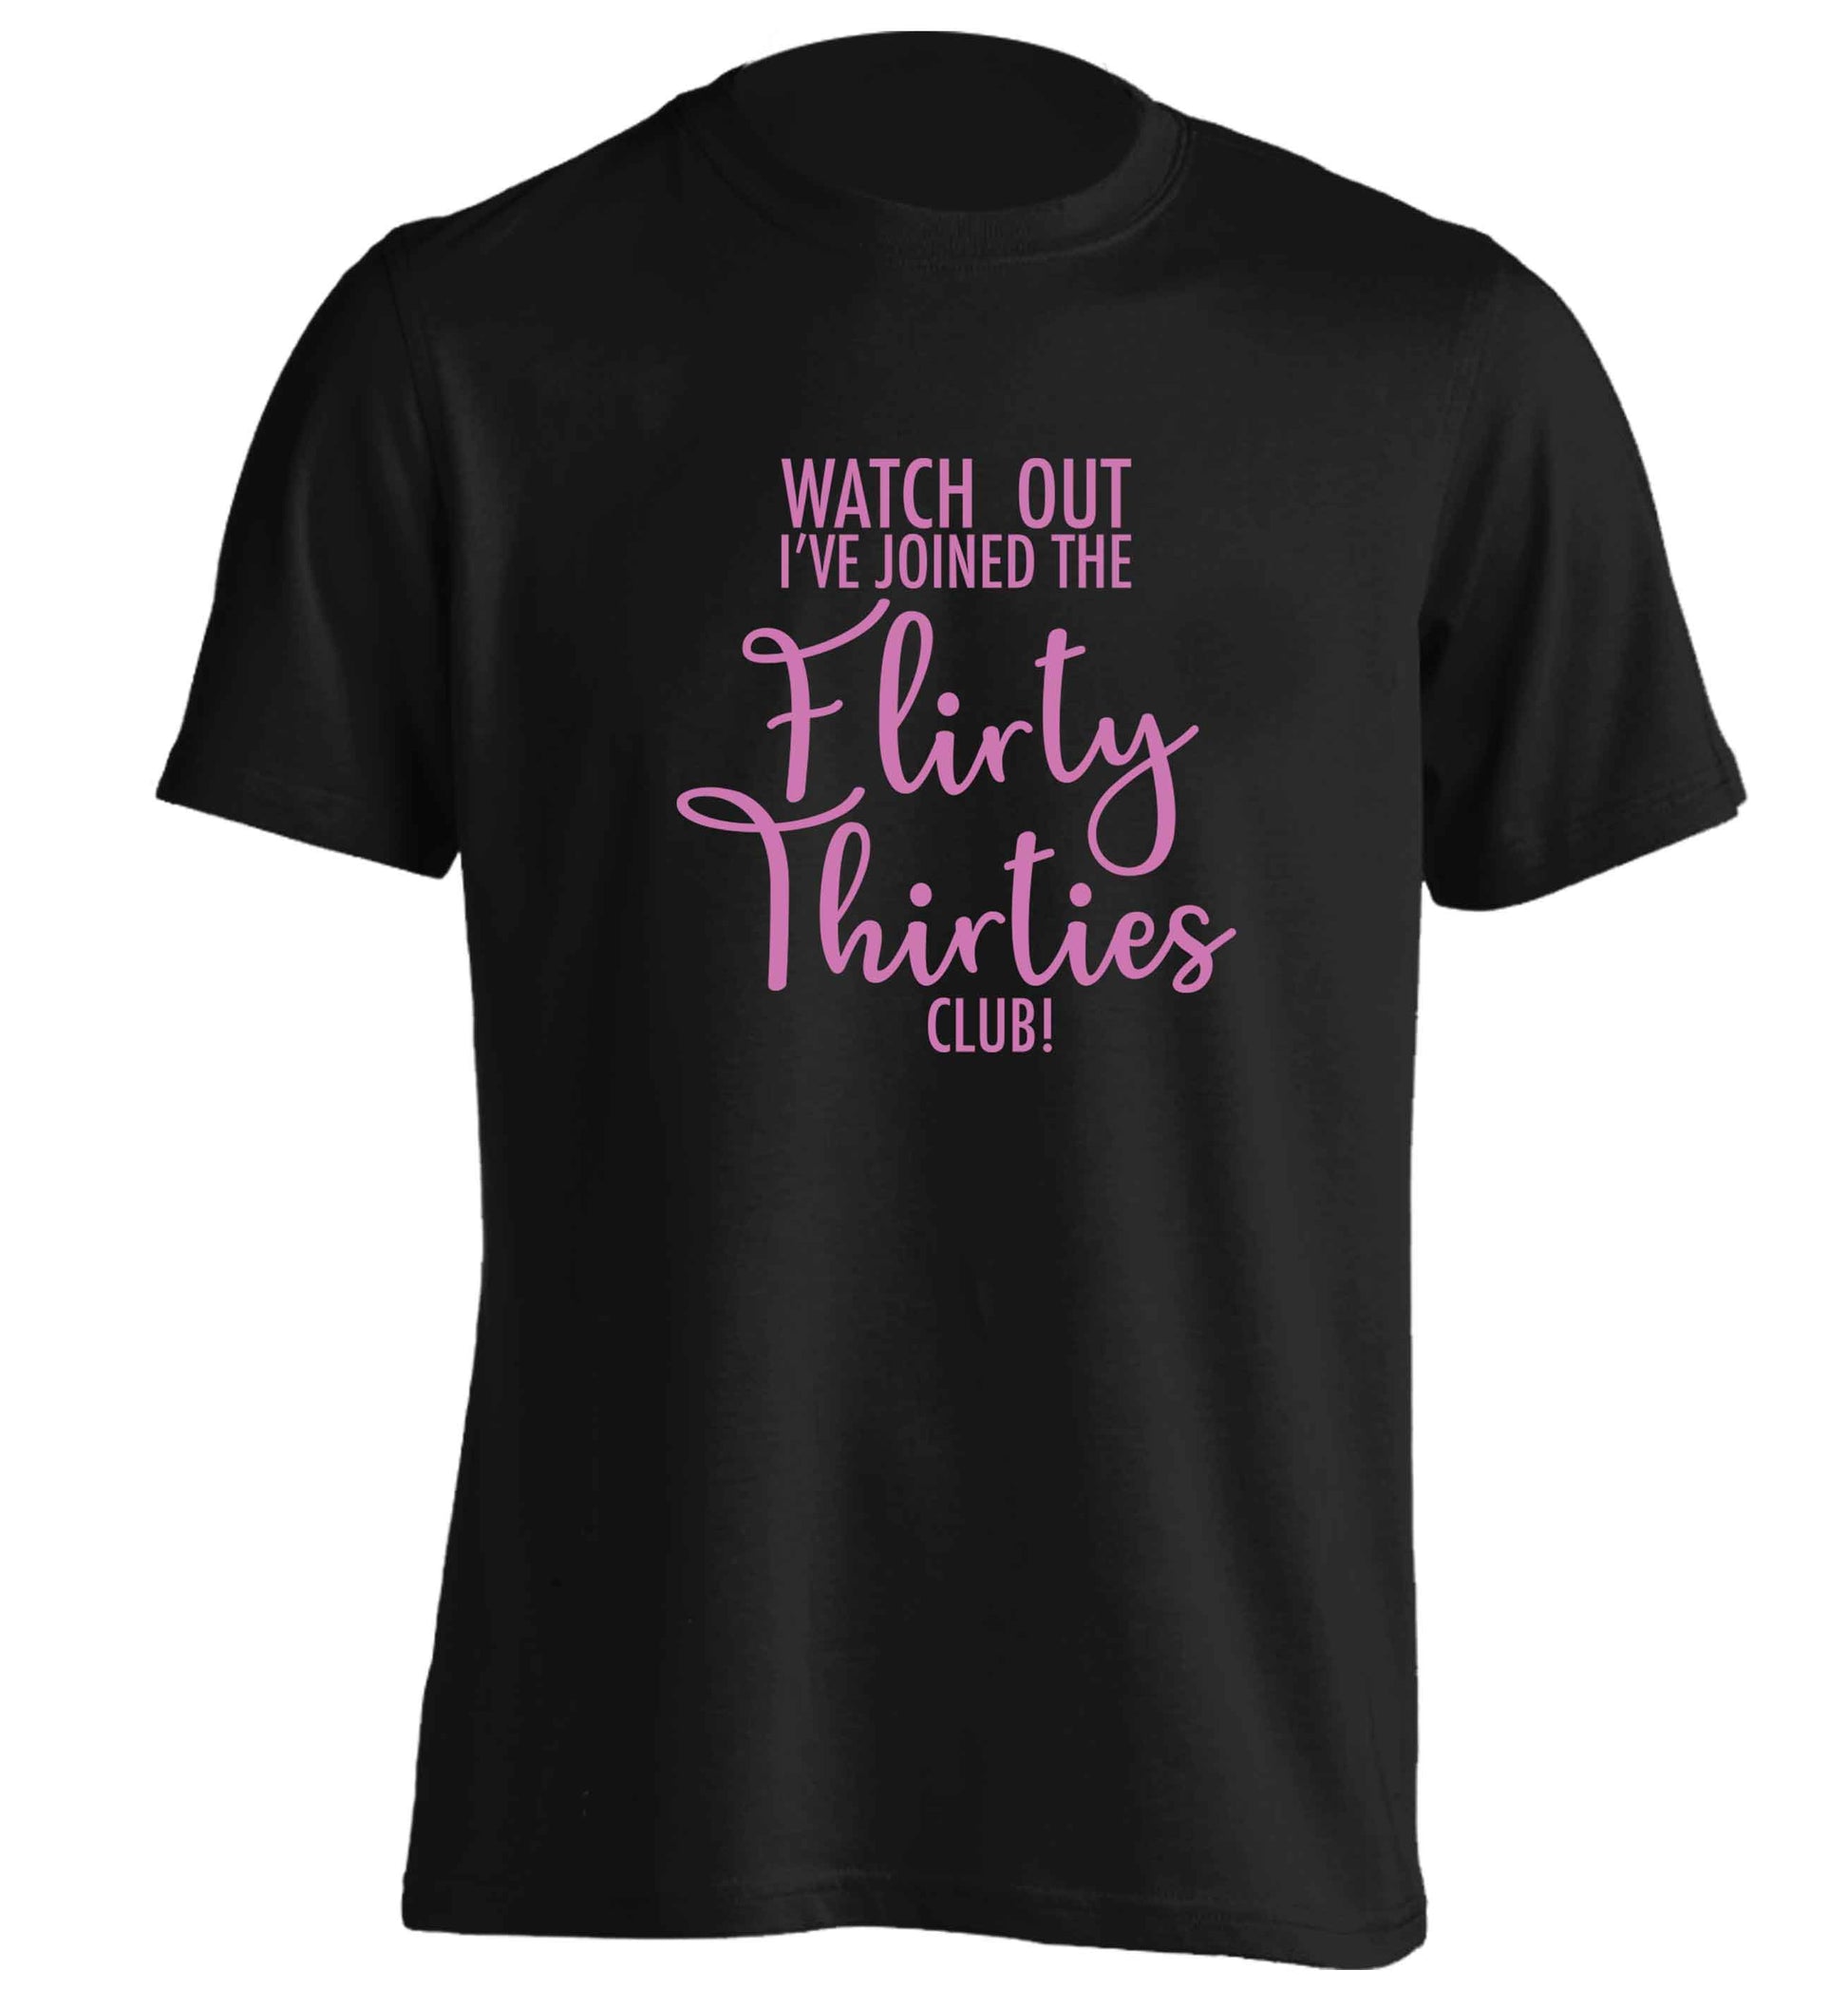 Watch out I've joined the flirty thirties club adults unisex black Tshirt 2XL